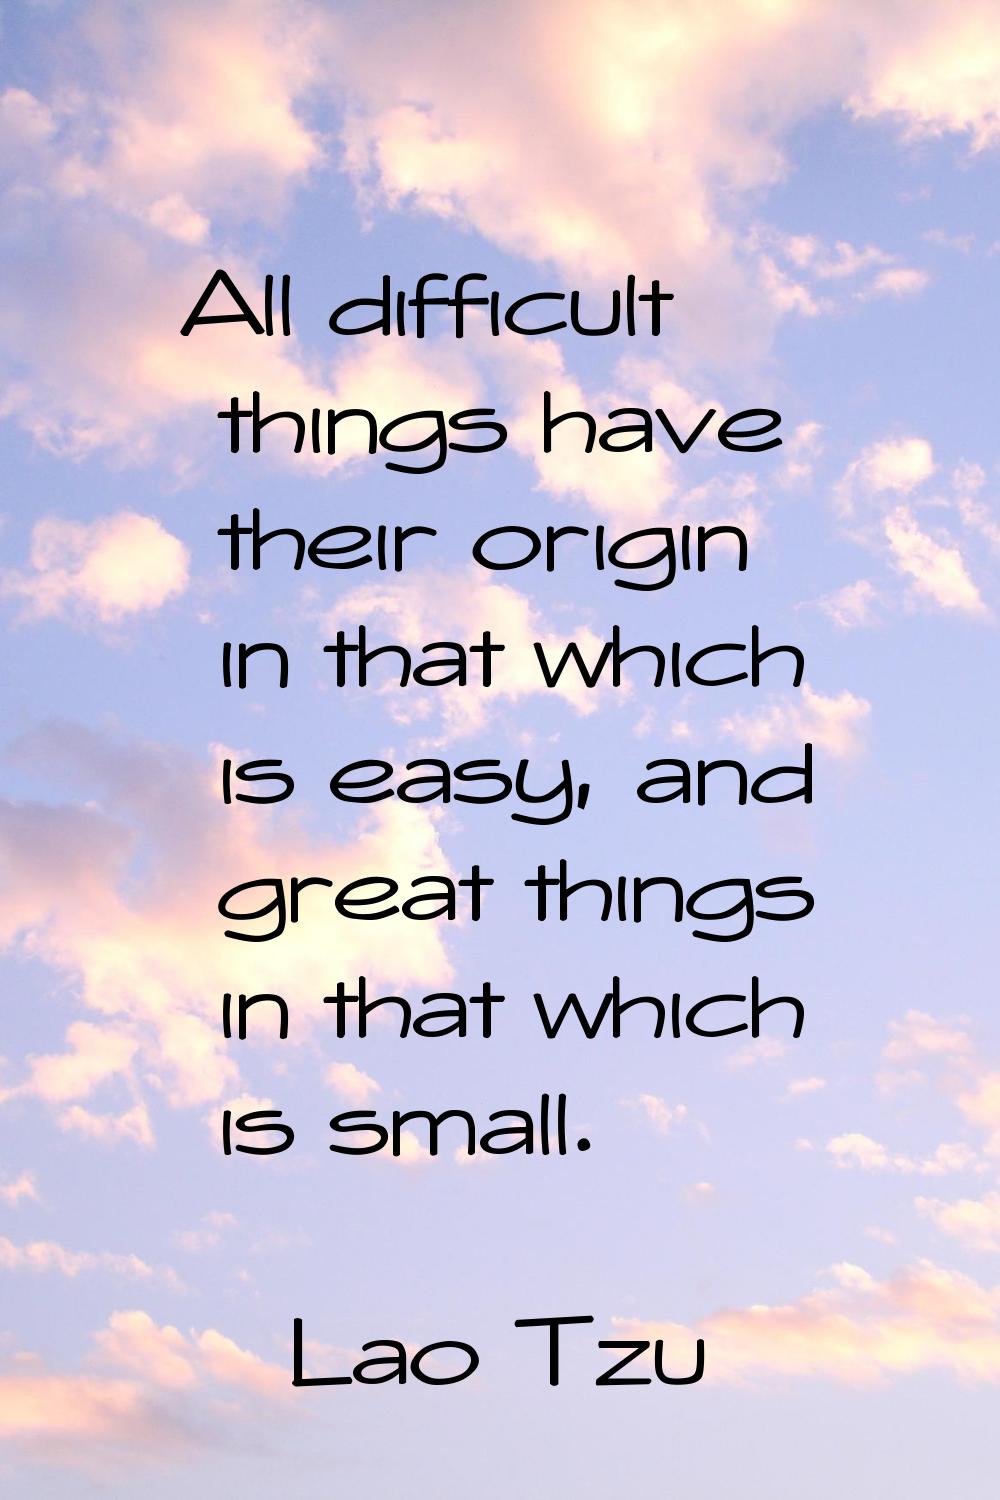 All difficult things have their origin in that which is easy, and great things in that which is sma